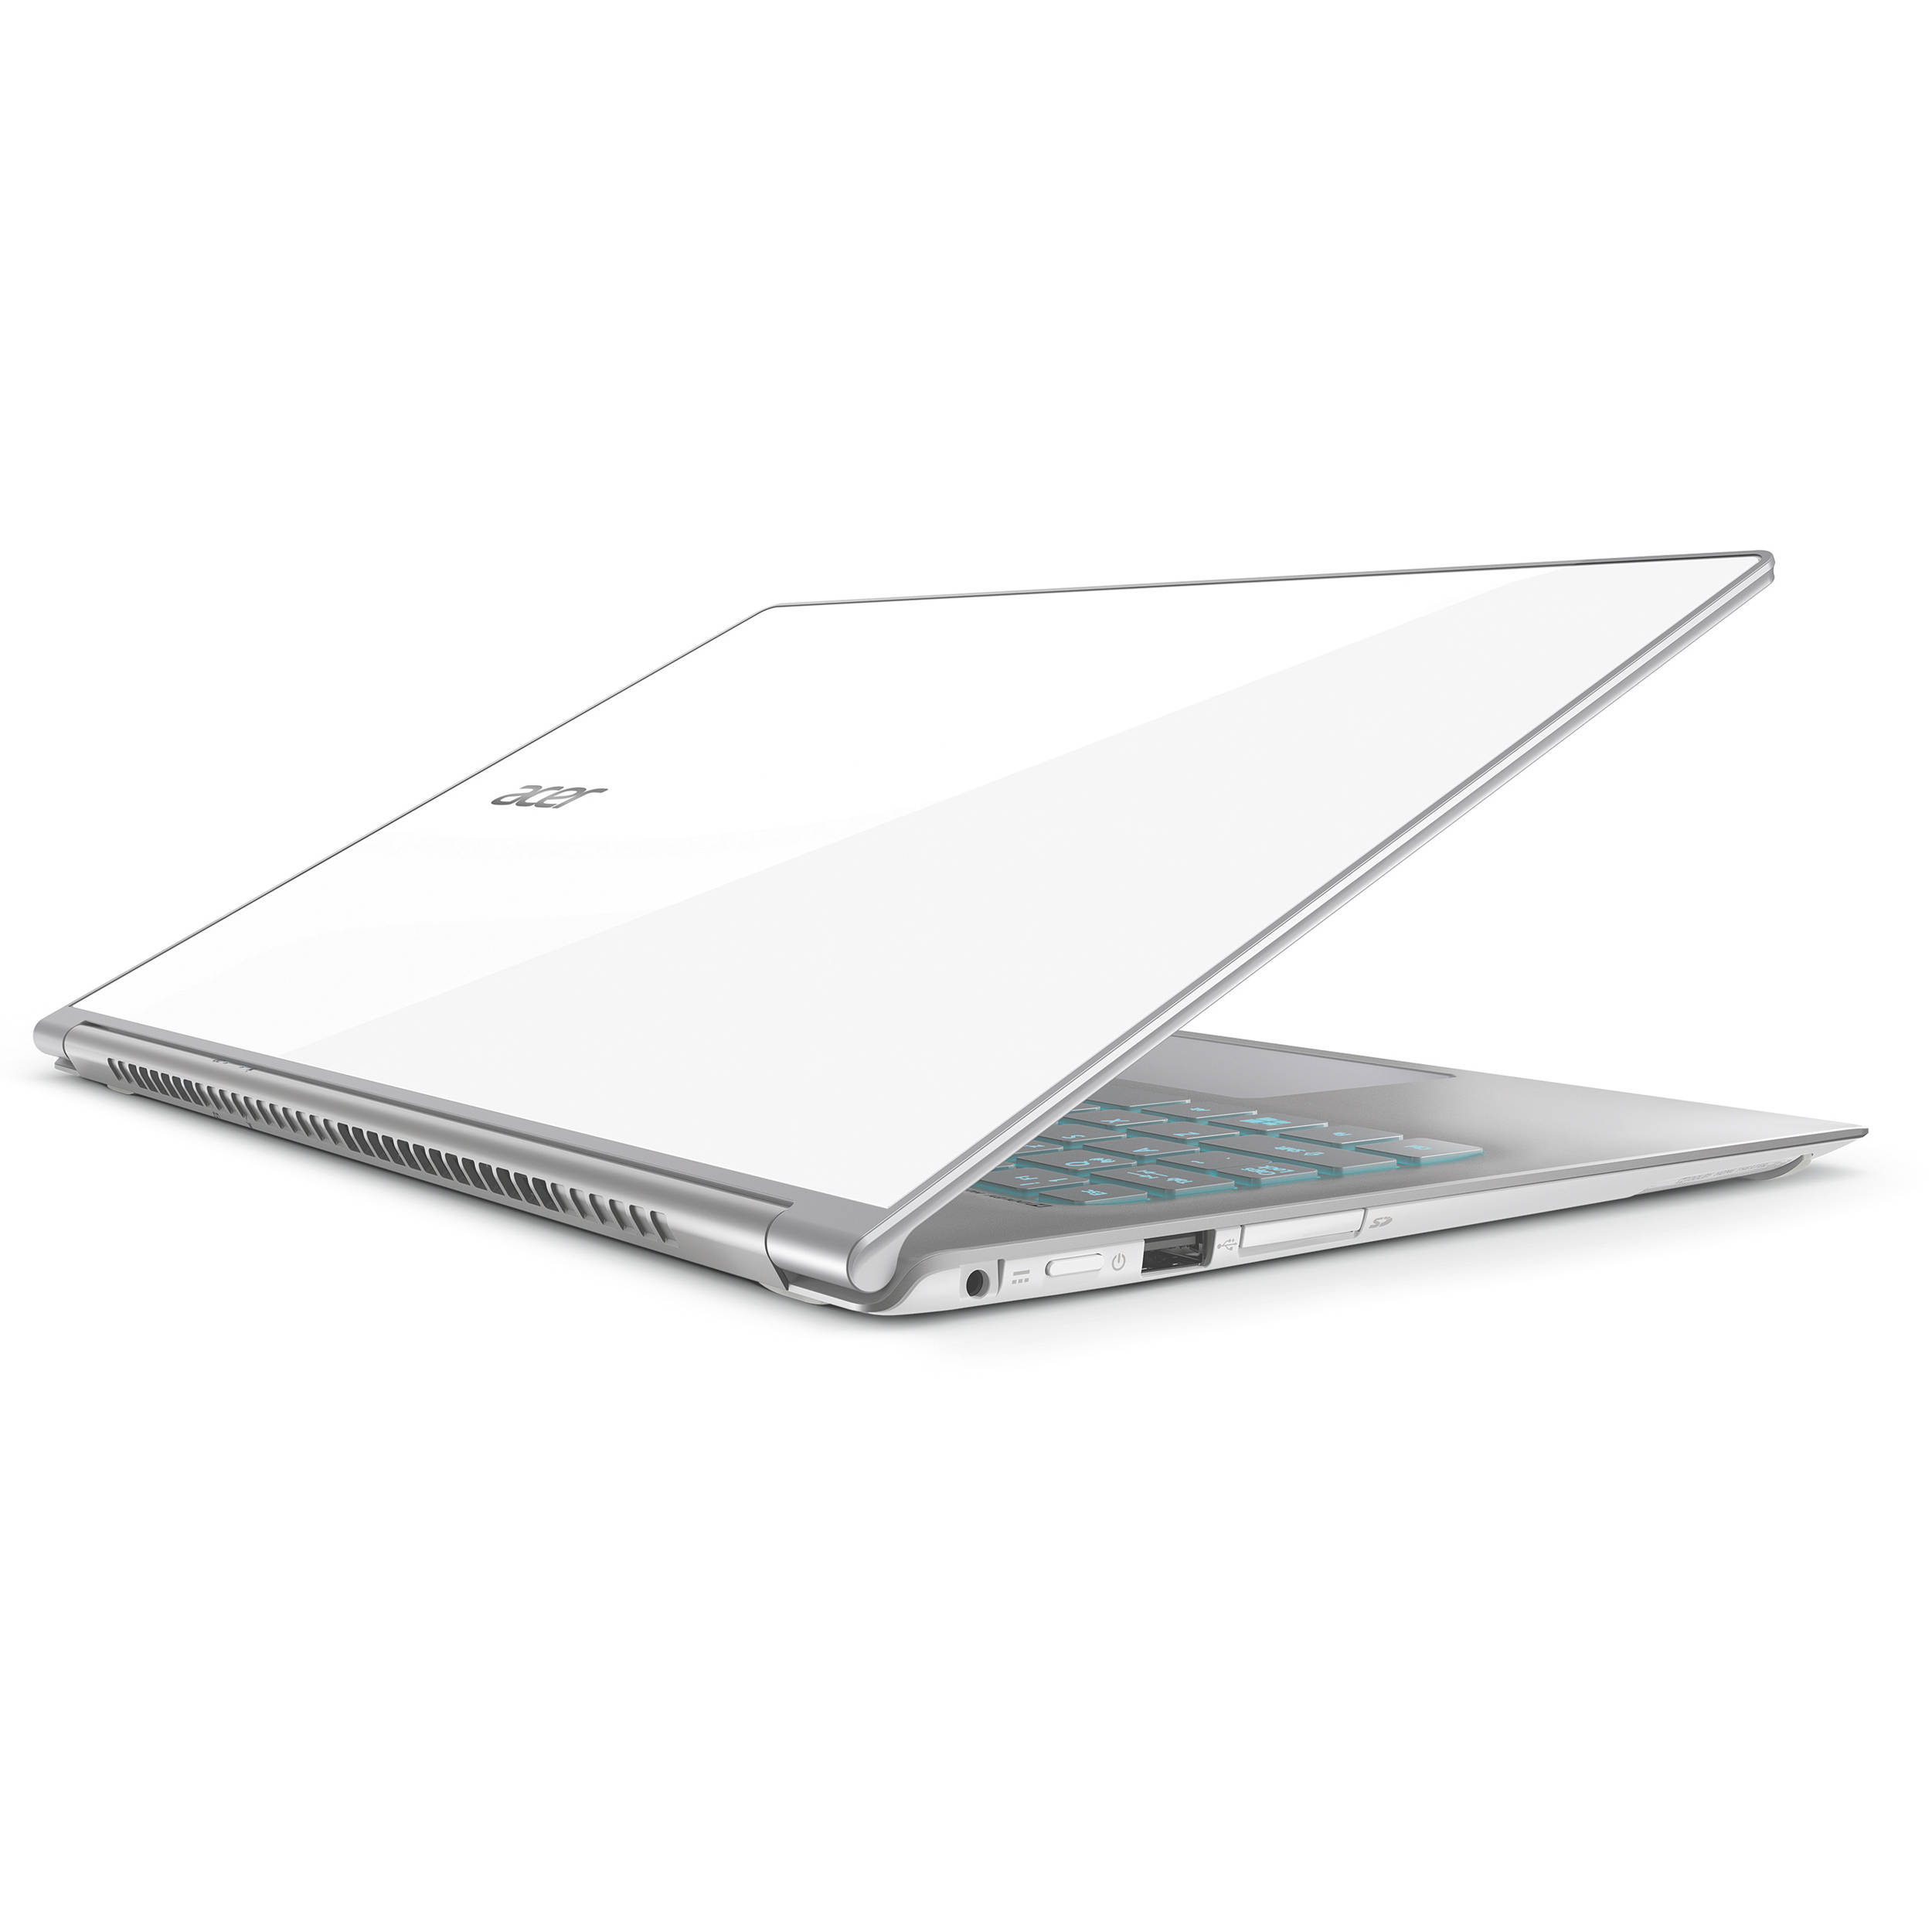 Acer Aspire S7 392 62 Multi Touch 13 3 Nx Mbkaa 008